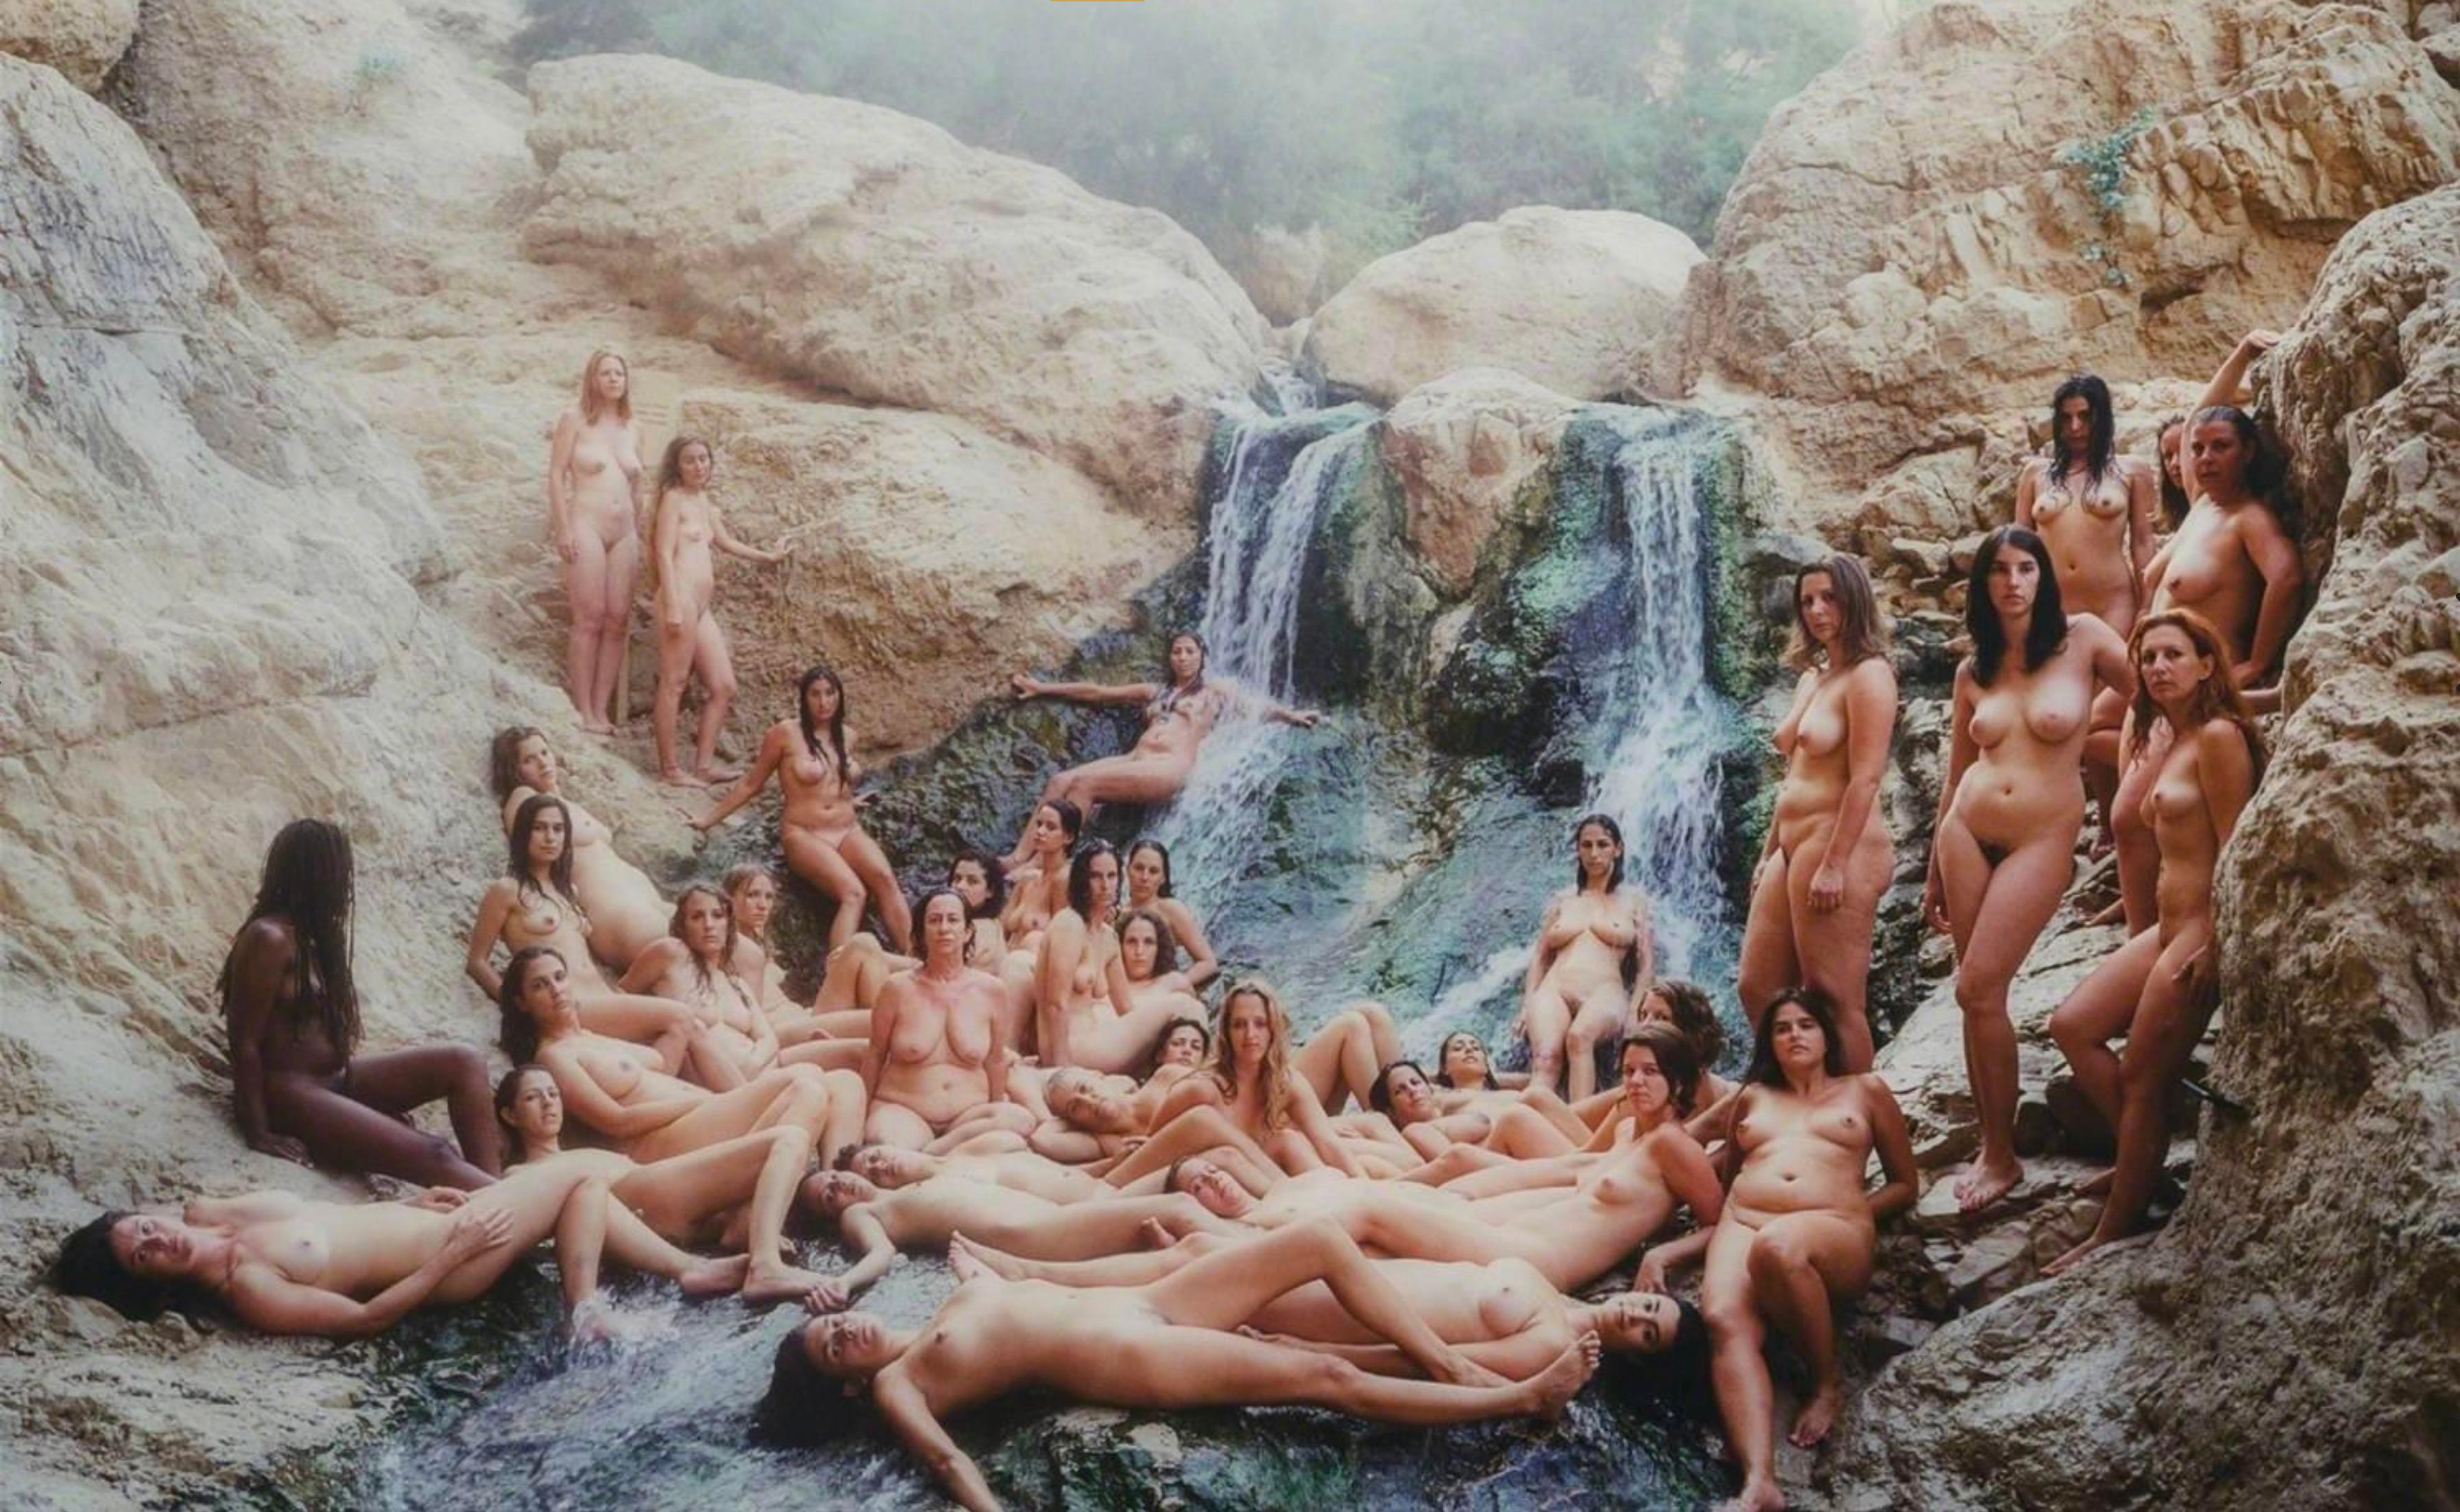 Nude women at Waterfall. Israel, Dead Sea , 15 Holy Land